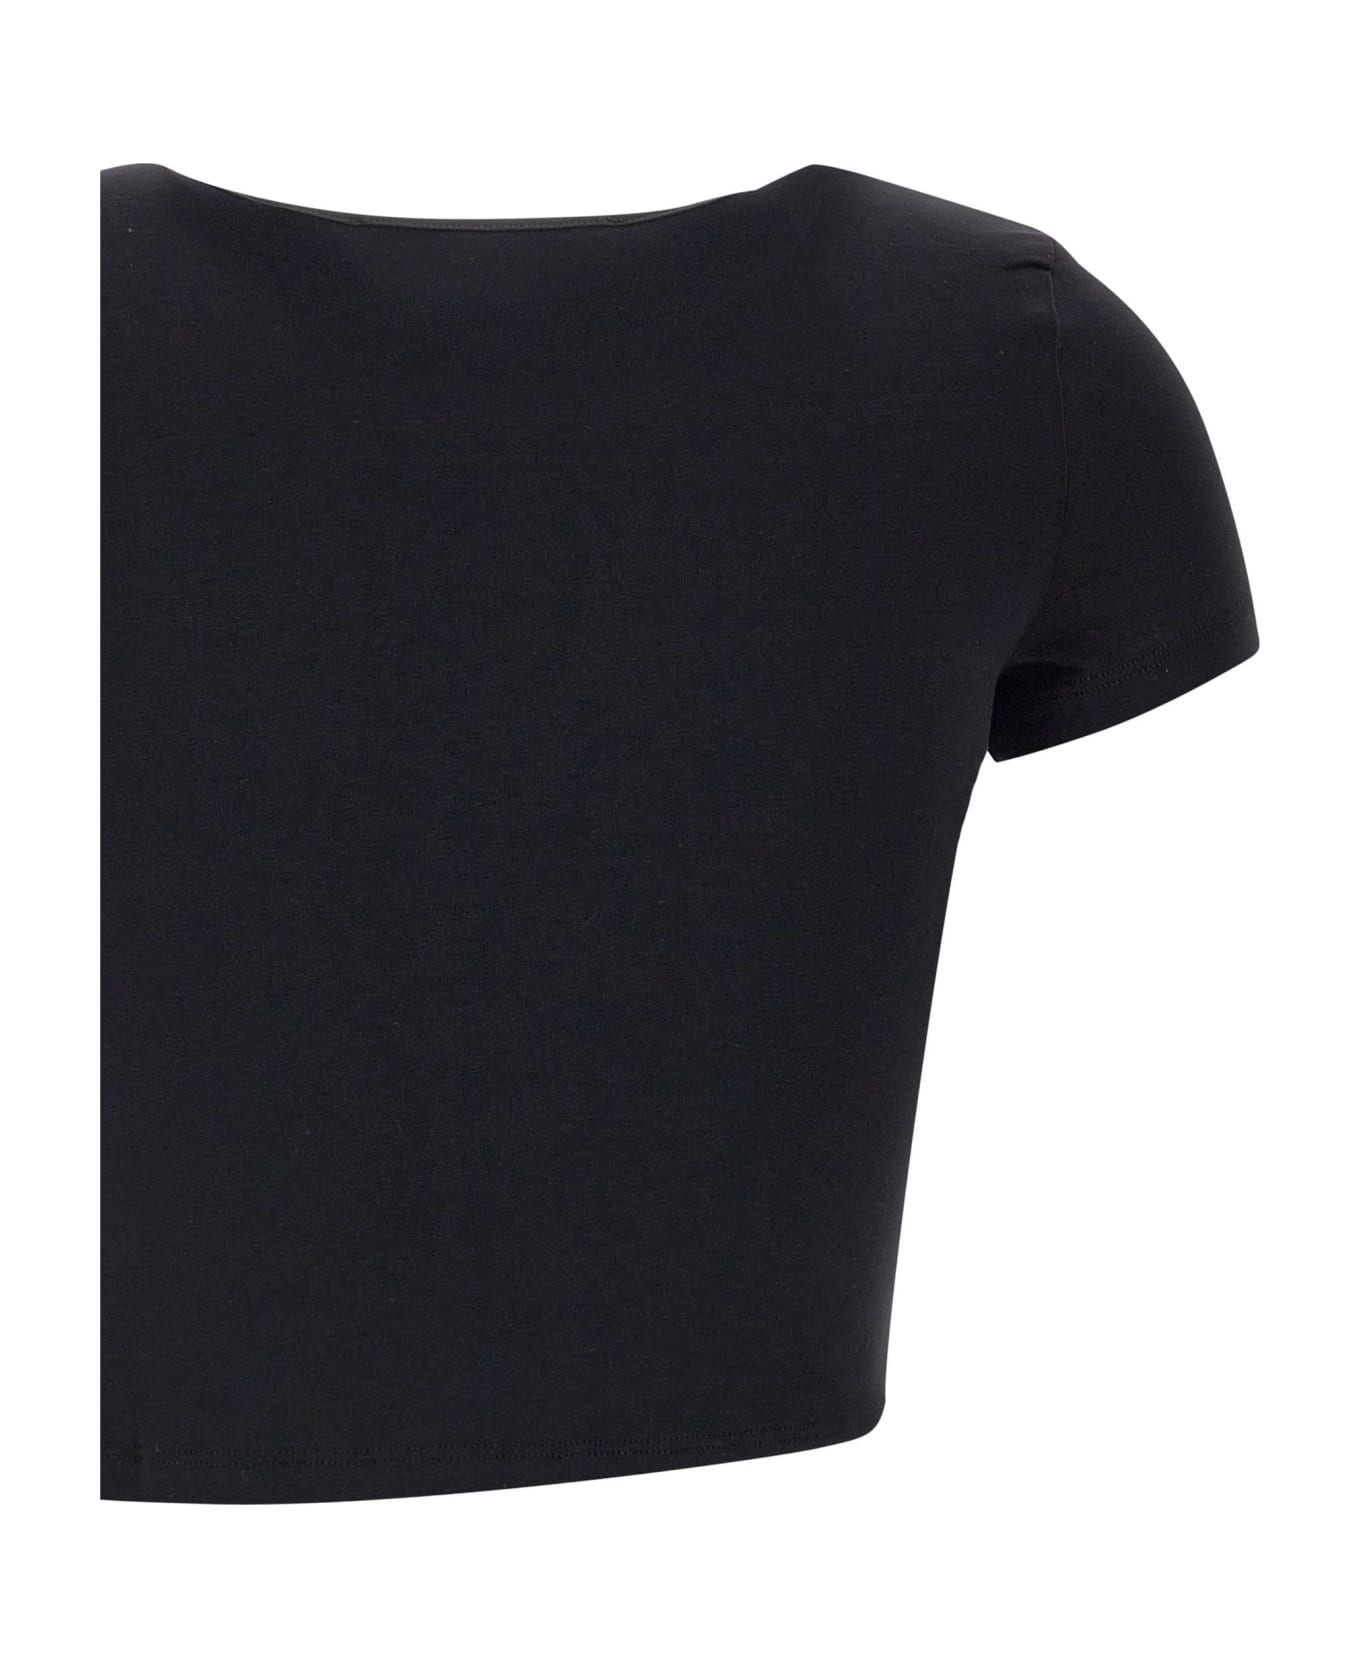 Rotate by Birger Christensen "may" Top - BLACK